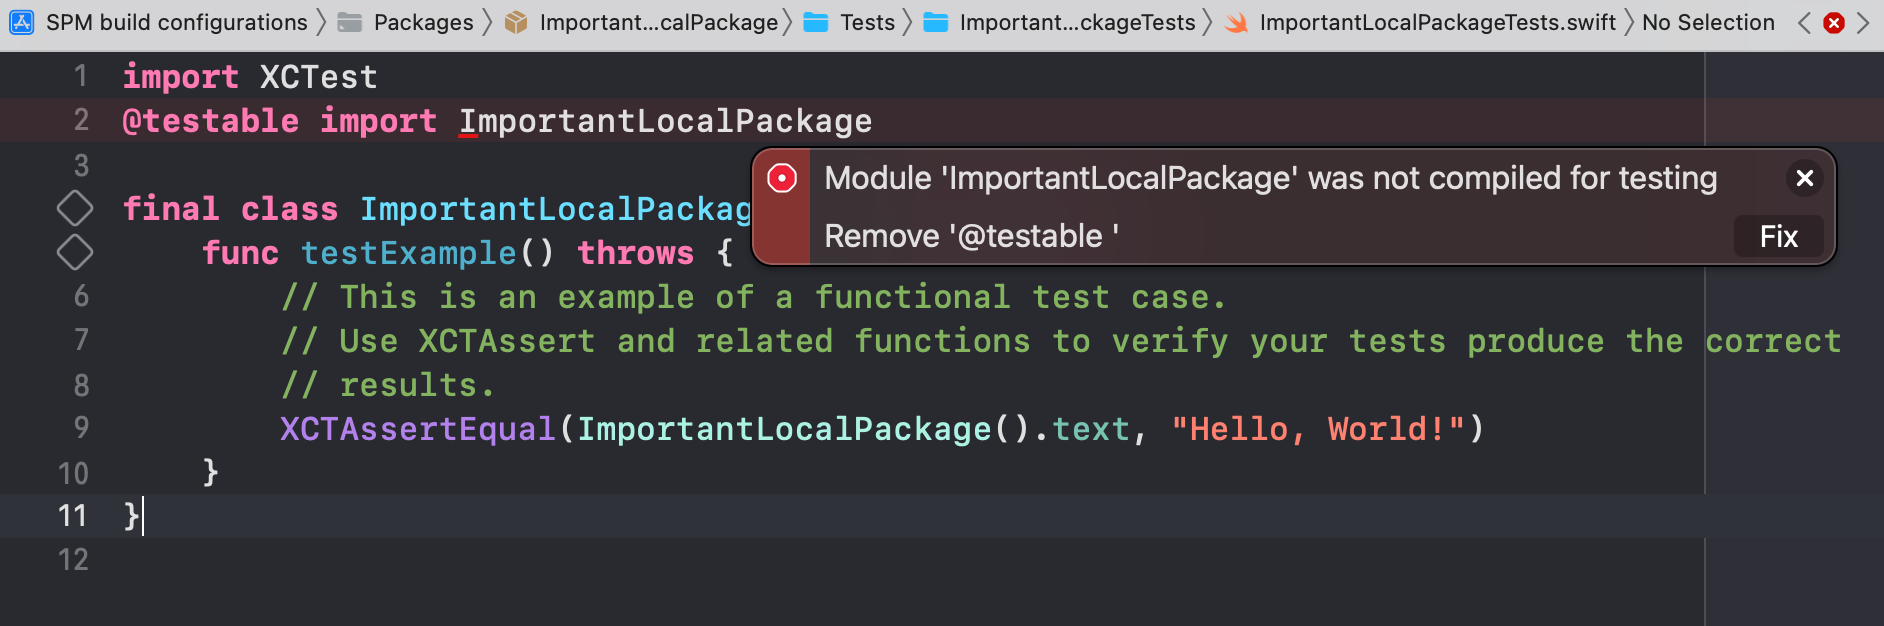 Module <package name> was not compiled for testing